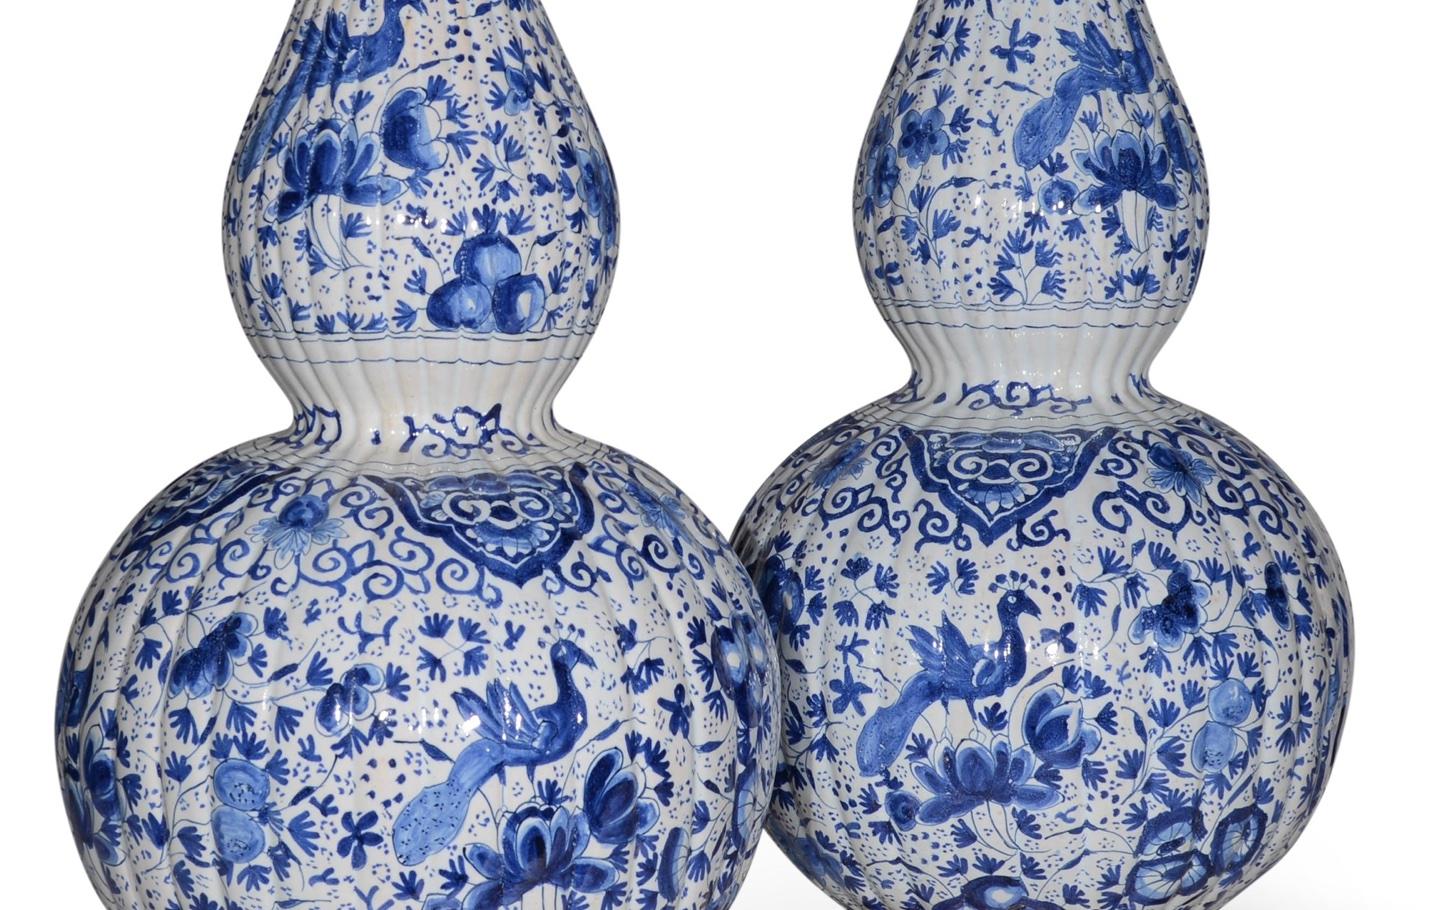 Glazed Large Pair of Blue and White 19th Century Delft Double Gourd Table Lamps For Sale